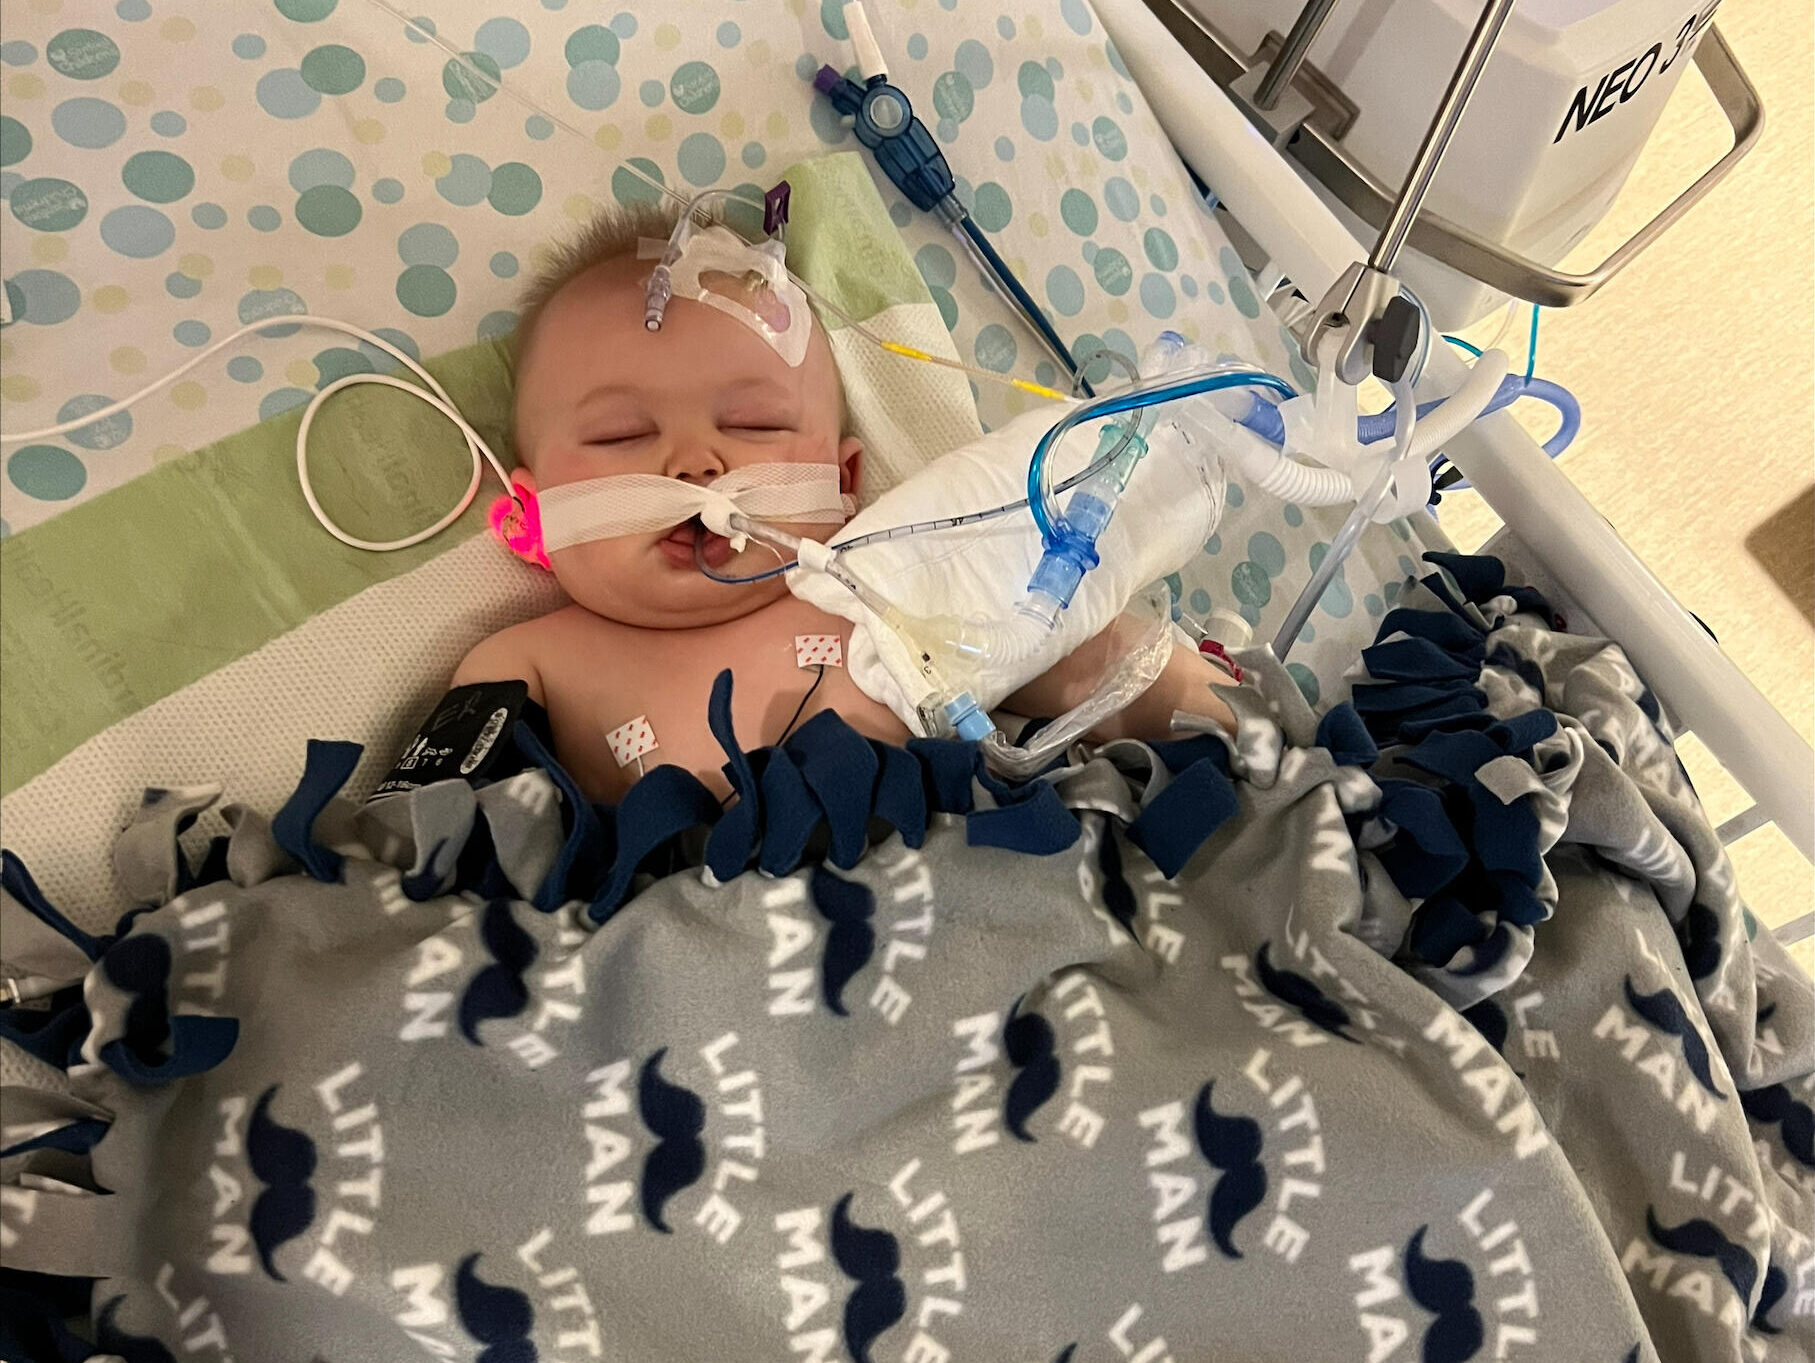 Baby boy sleeps in a hospital bed, hooked up to monitors and tubes.